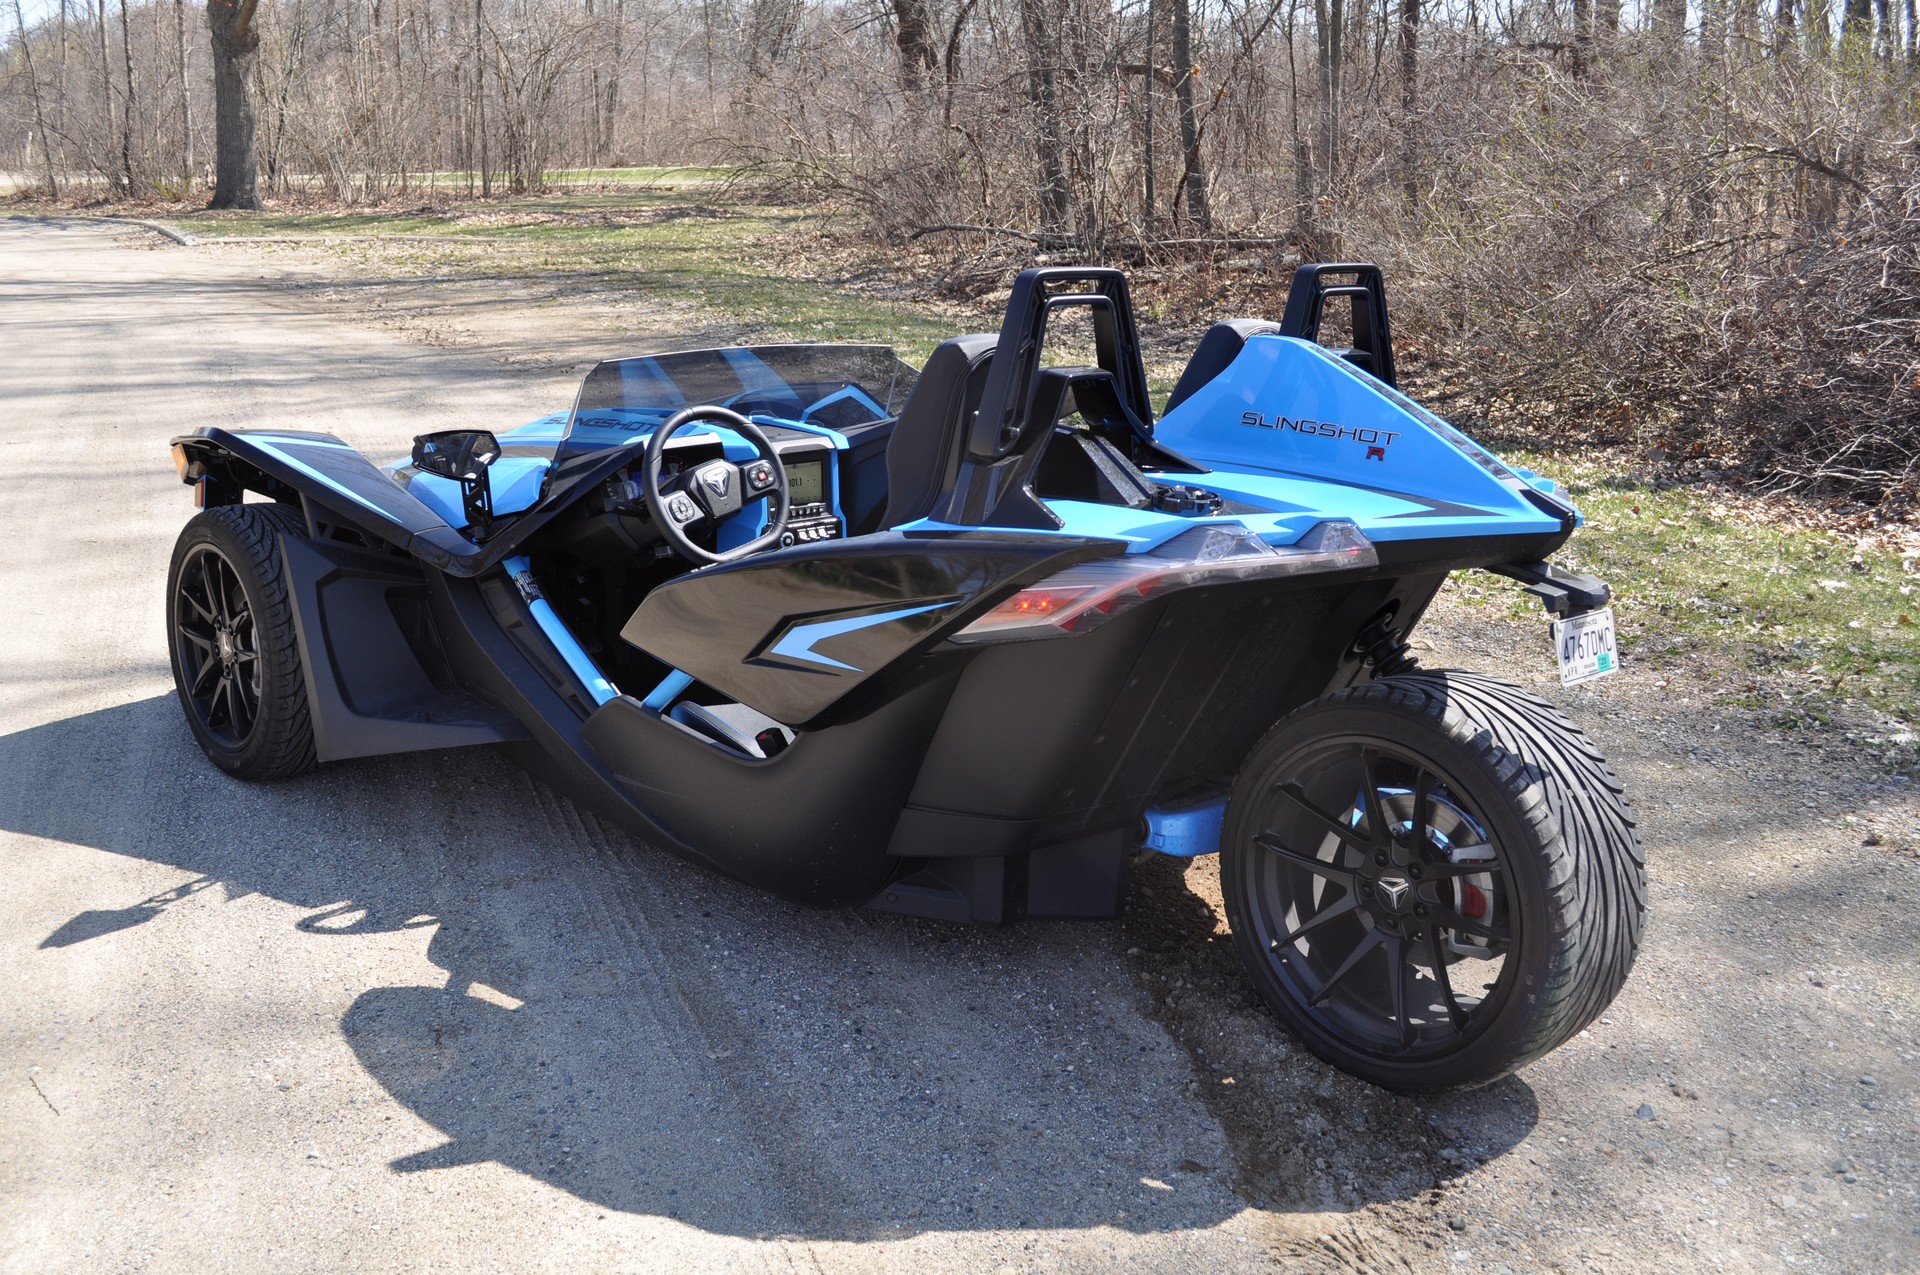 2020 Polaris Slingshot Review: Fast And Fun, But Stick To The Manual